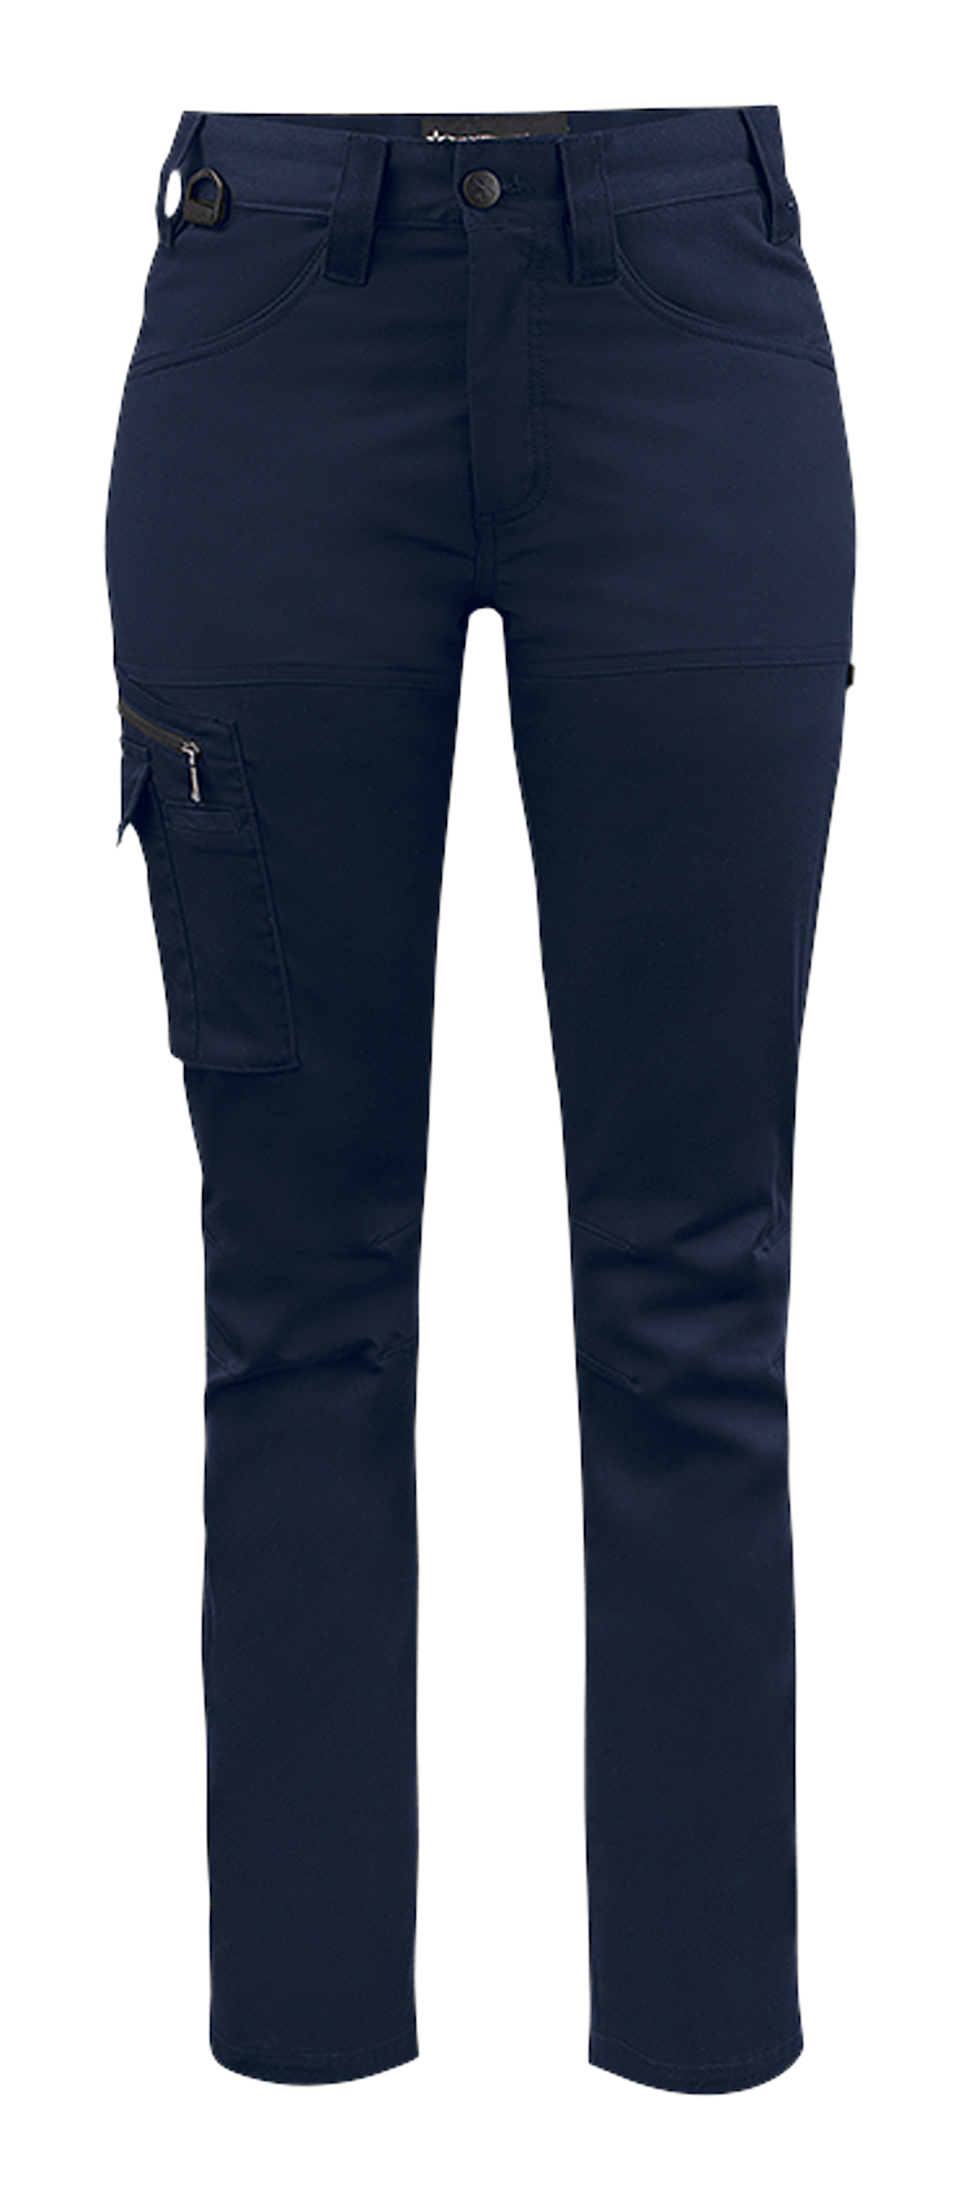 Functional Stretch Pants - Navy